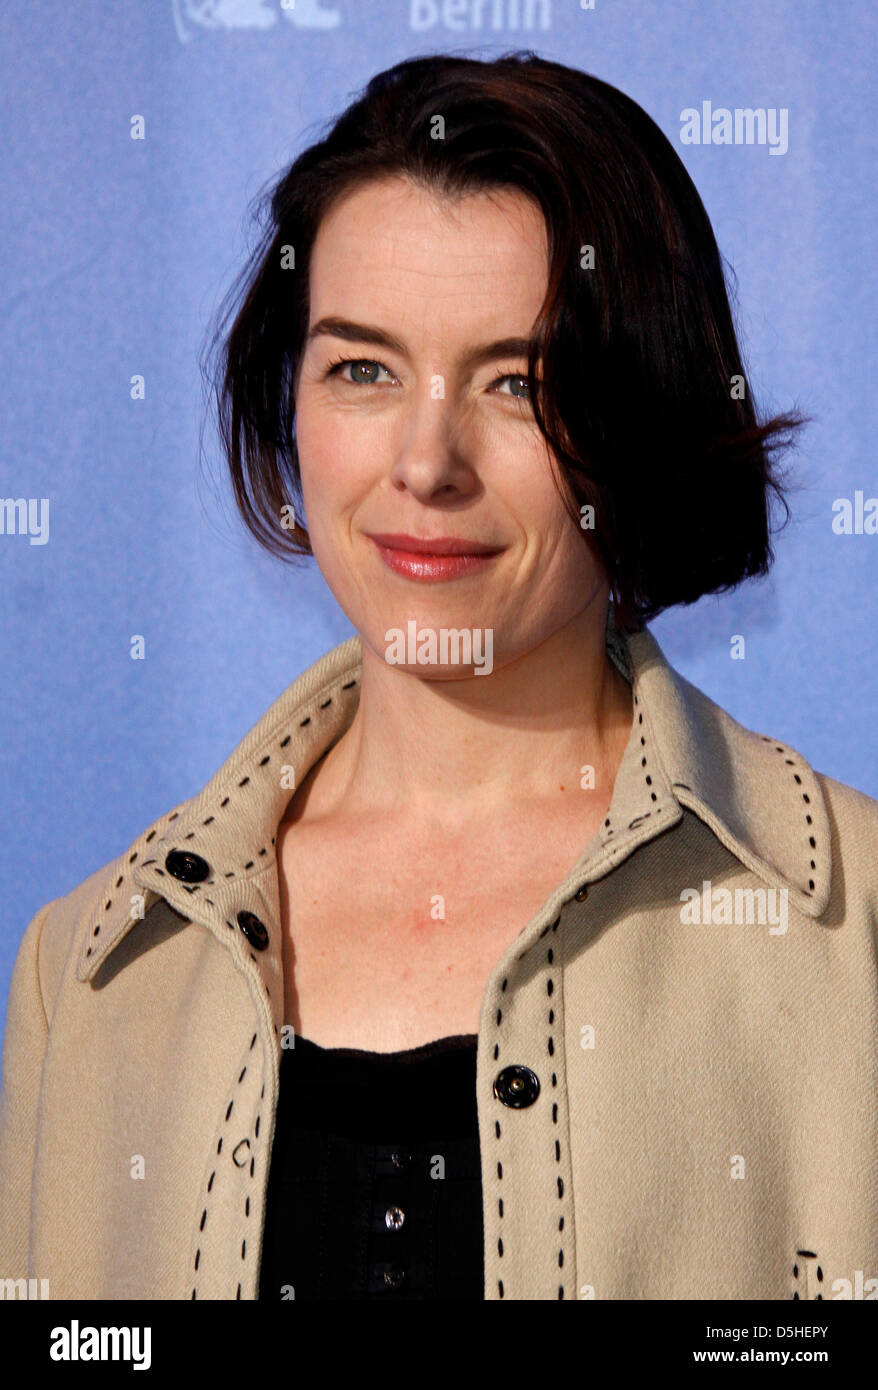 British actress Olivia Williams attends the press conference of the film 'The Ghost Writer' during the 60th Berlinale International Film Festival in Berlin, Germany, Friday 12 February 2010. The festival runs until 21 Febuary 2010. Photo: Hubert Boesl Stock Photo